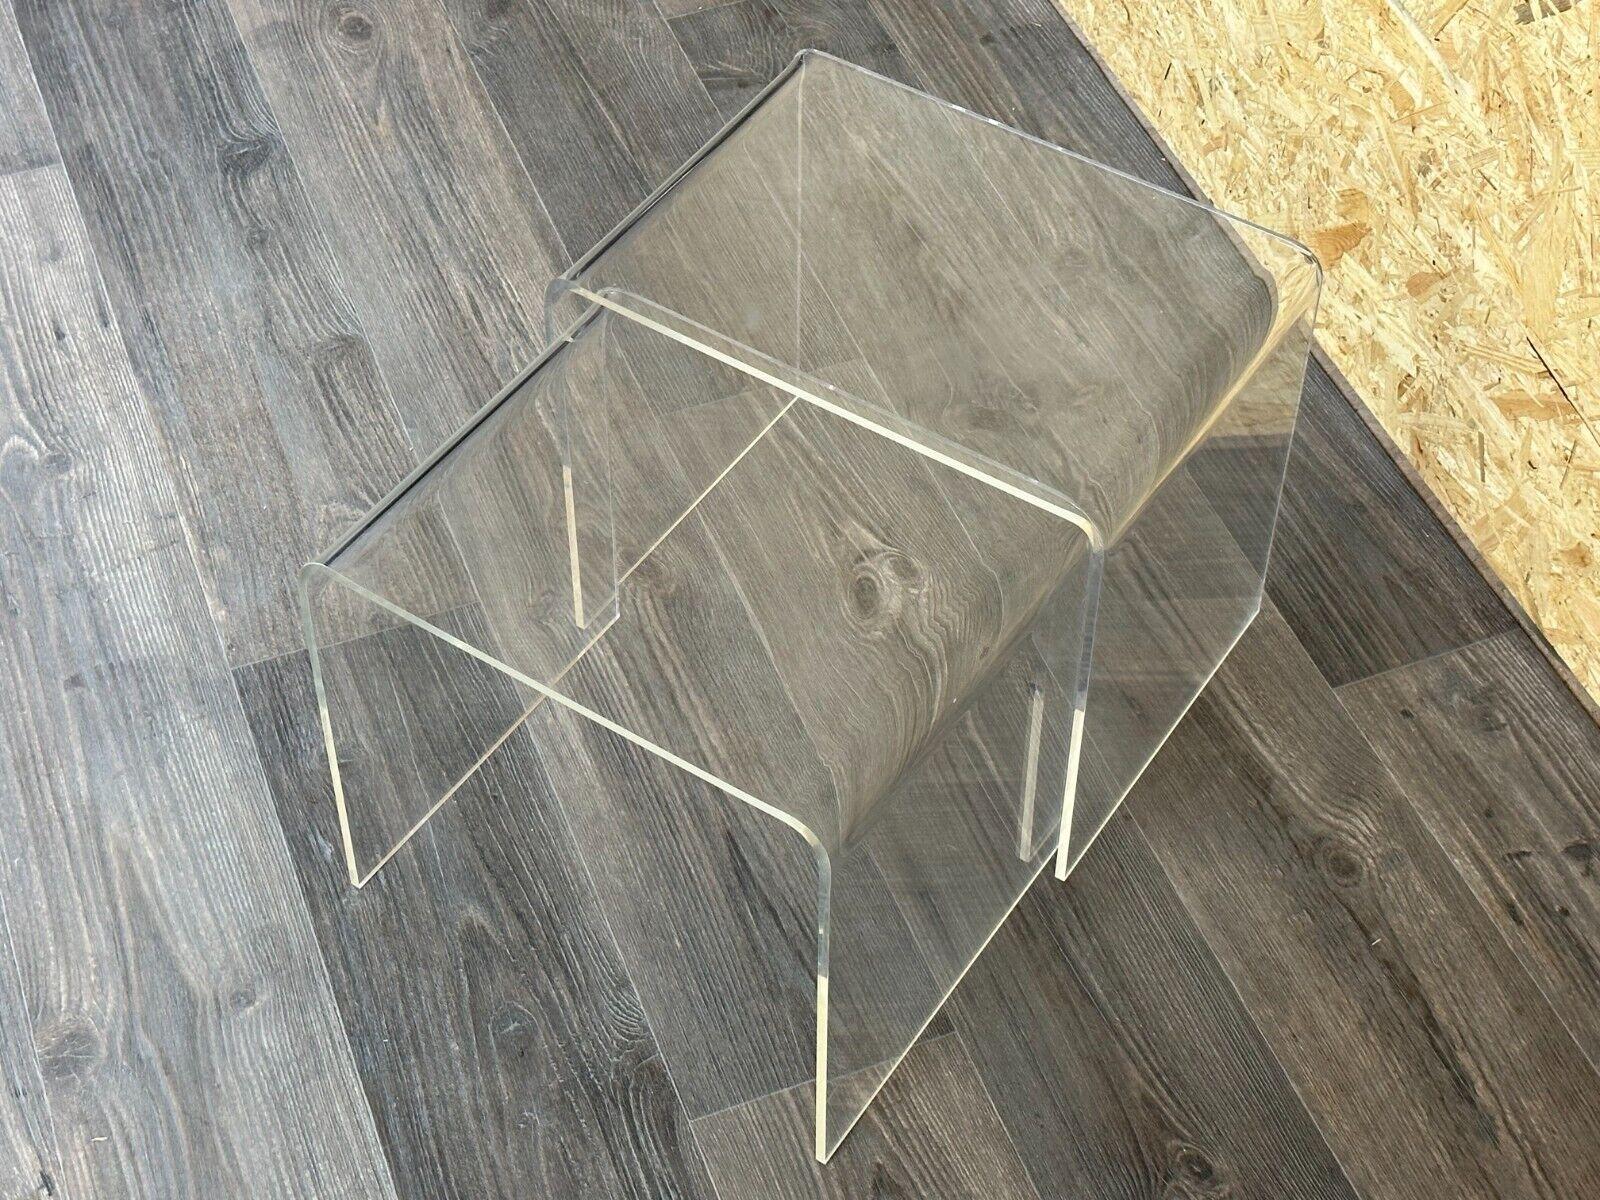 60s 70s Side Tables Nesting Tables Acrylic Plastic Space Age Design In Good Condition For Sale In Neuenkirchen, NI